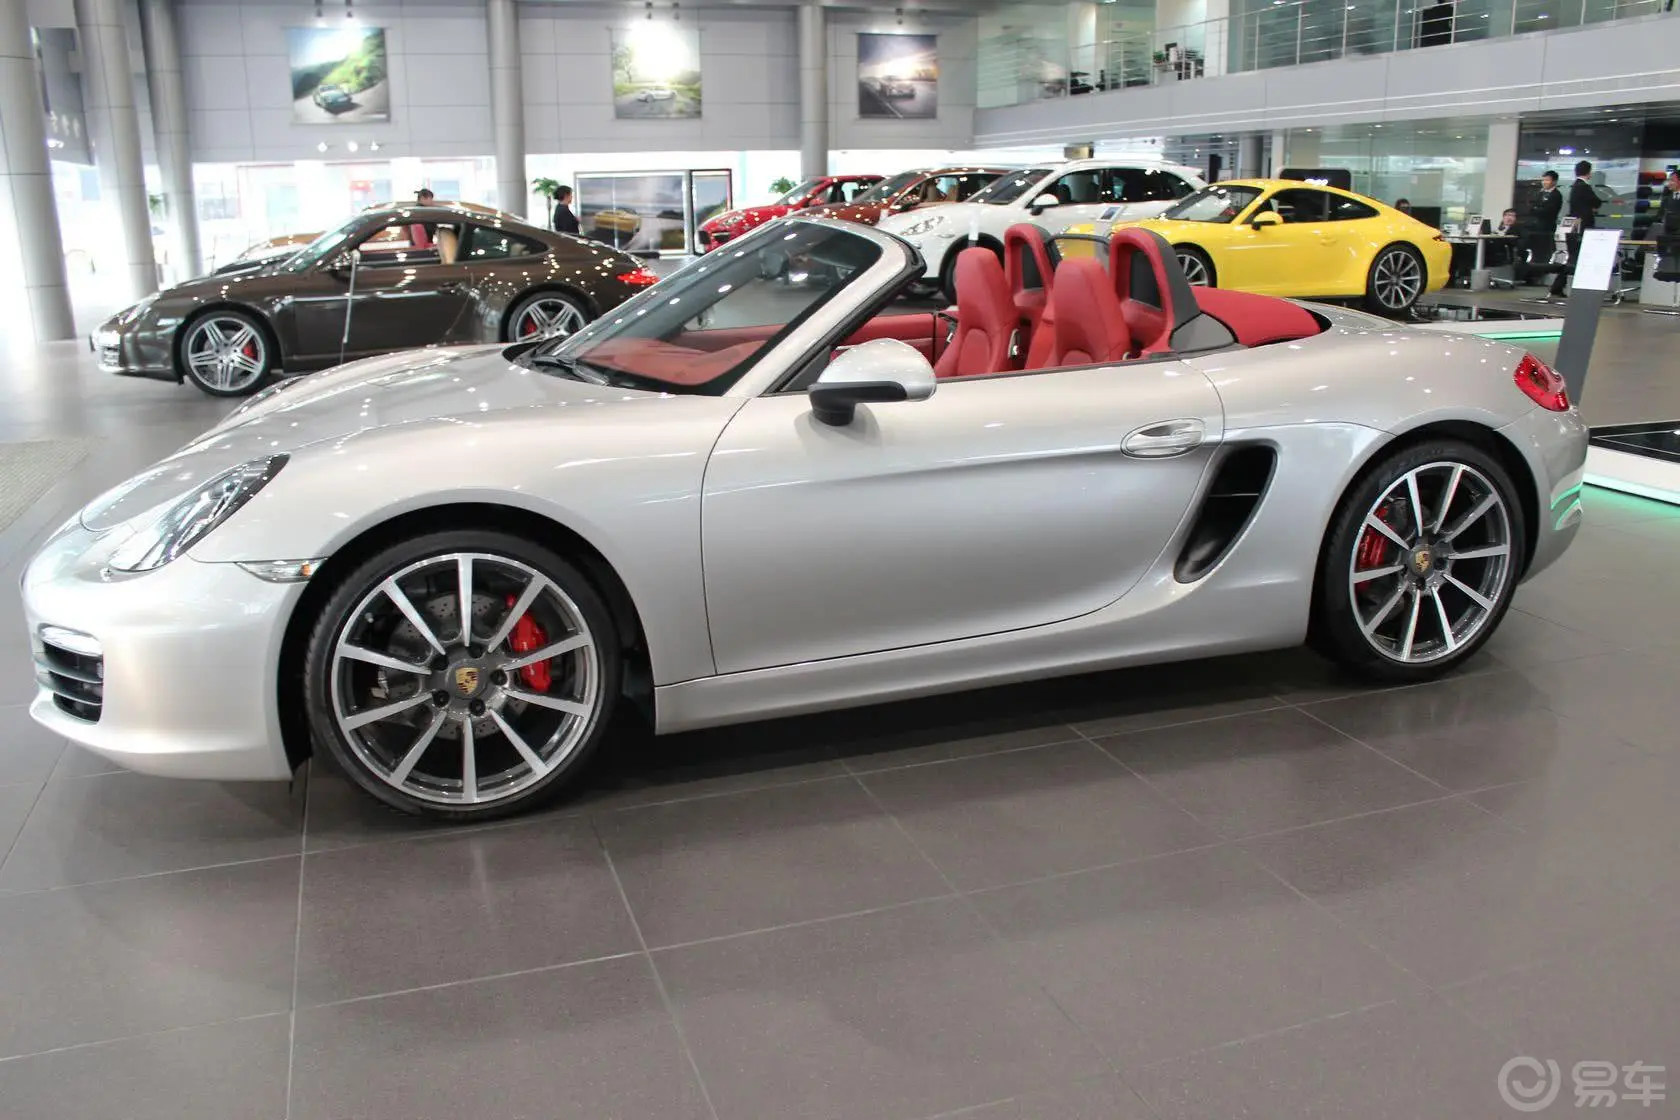 BoxsterBoxster S 3.4正侧车头向左水平